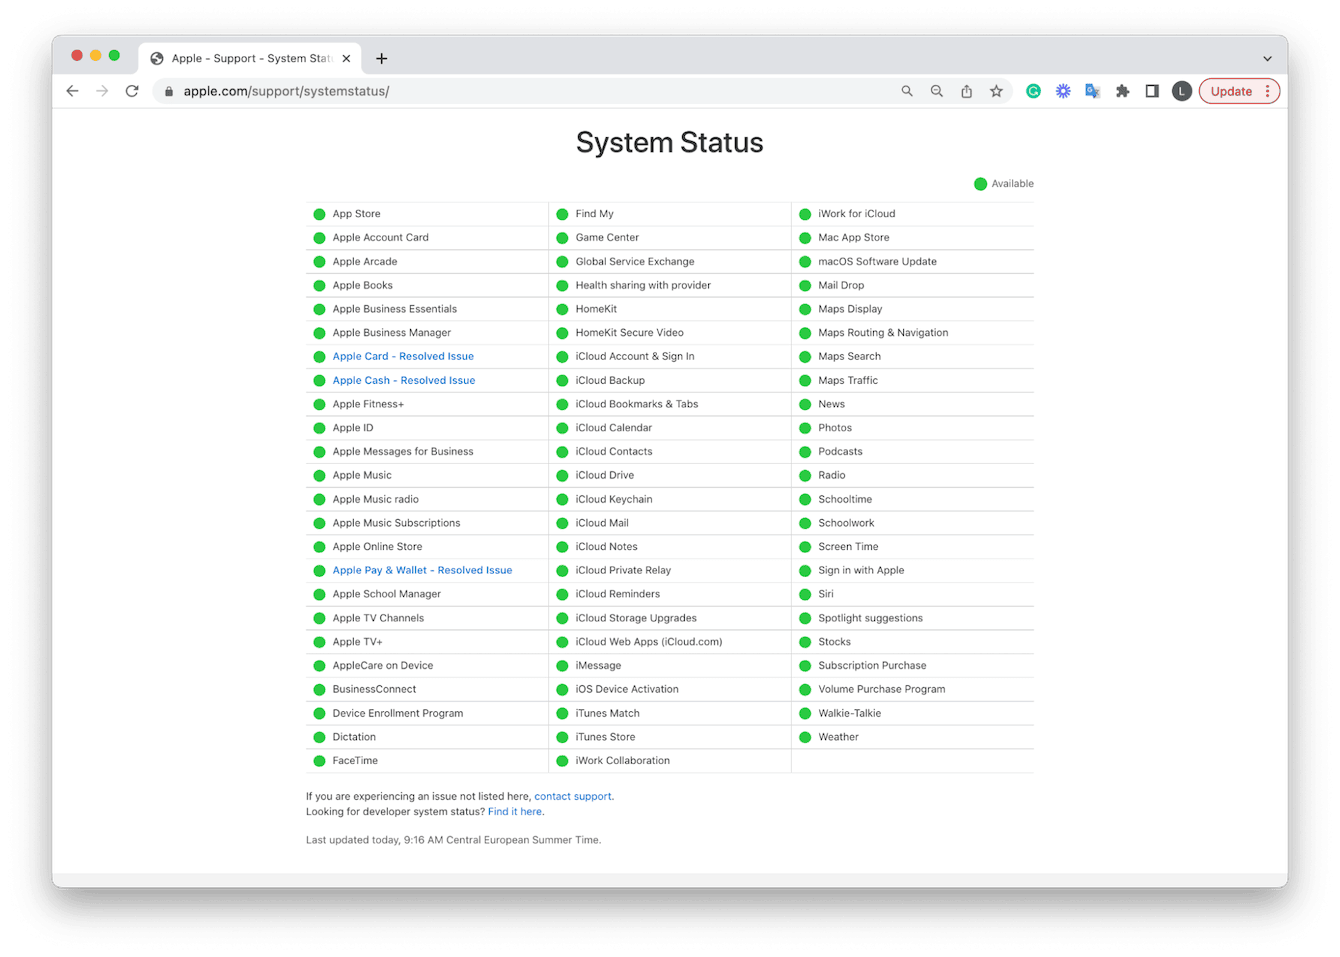 System Status page